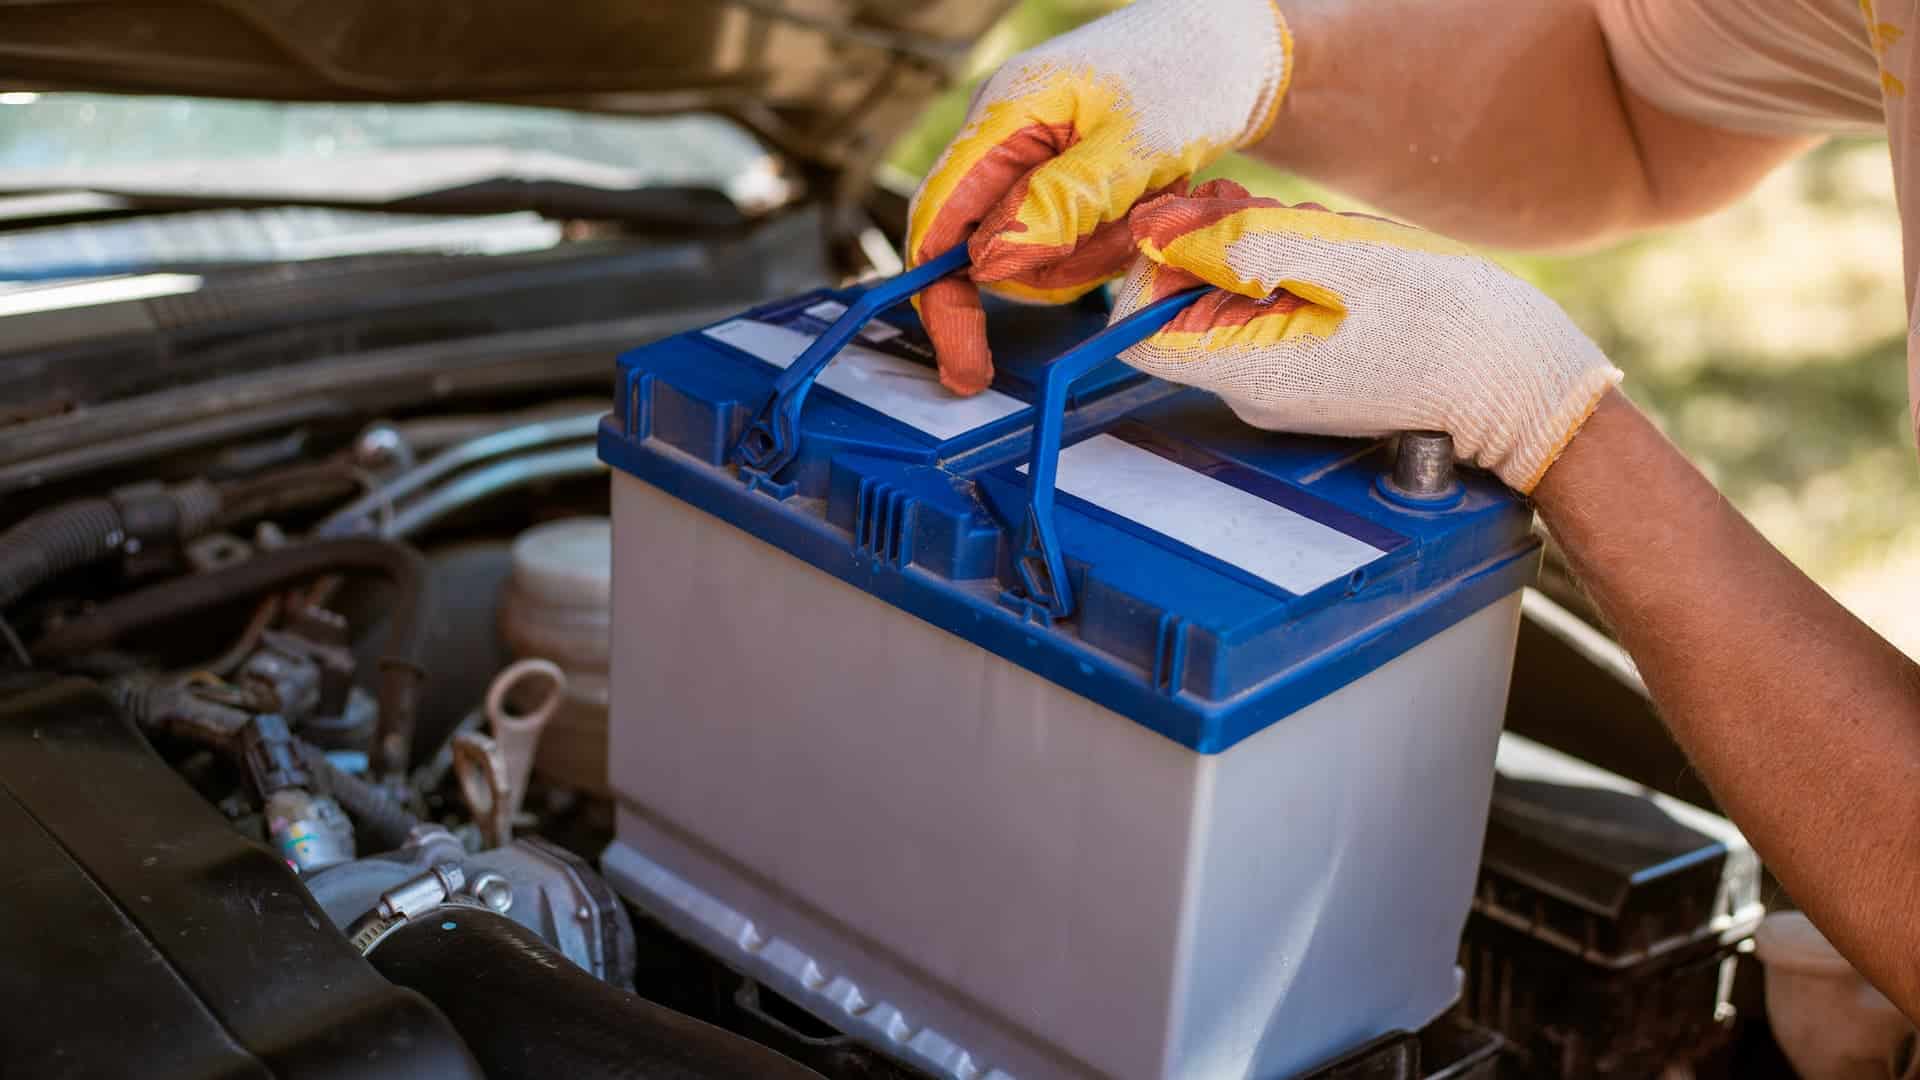 Use gloves when changing battery